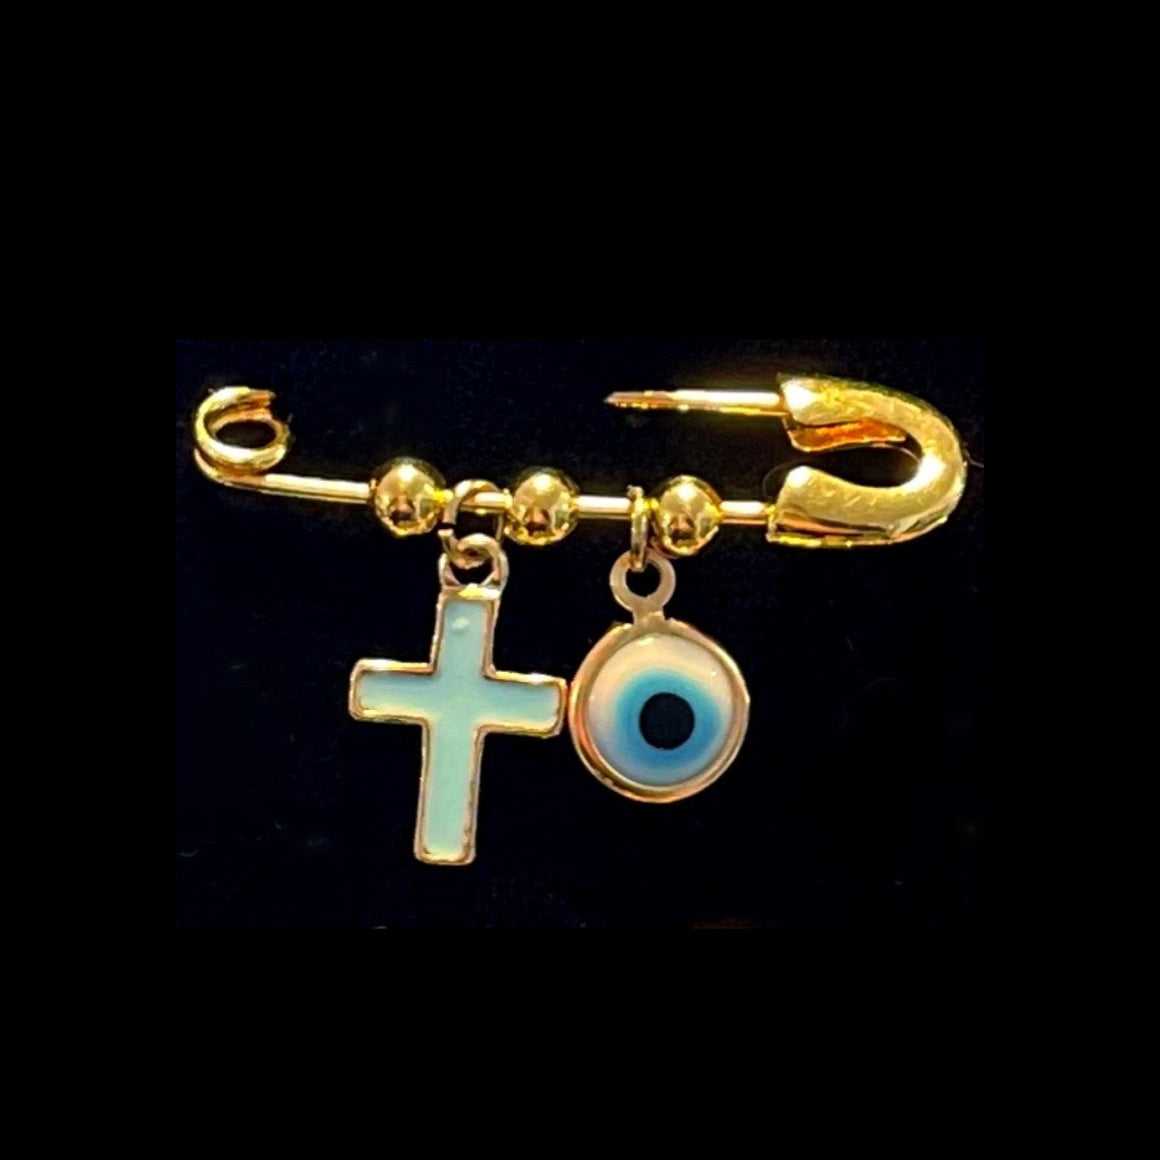 WITNESS PIN - GOLD PIN 3 BEAD + 2 CHARMS